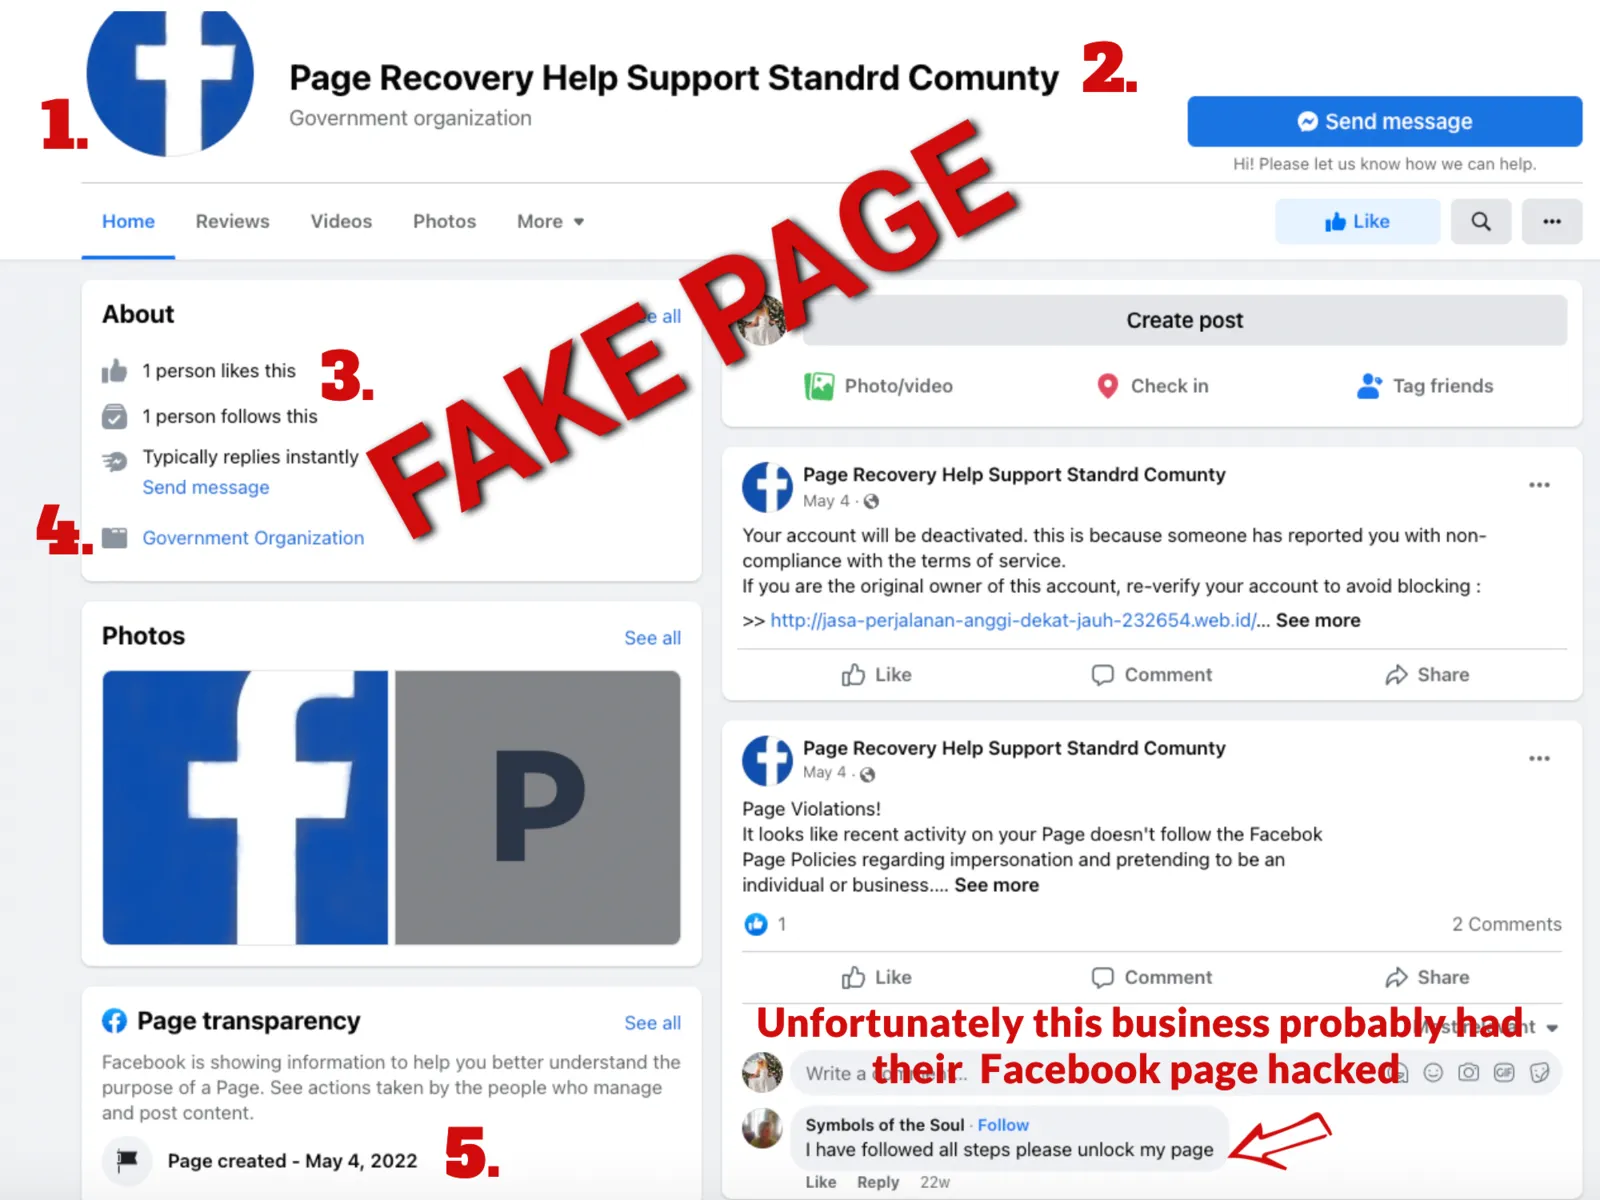 Avast Software - BEWARE of fake Facebook login pages spreading by Facebook  applications. Another wave of Facebook phishing is spreading among Facebook  users. Imagine you get a message from another Facebook user